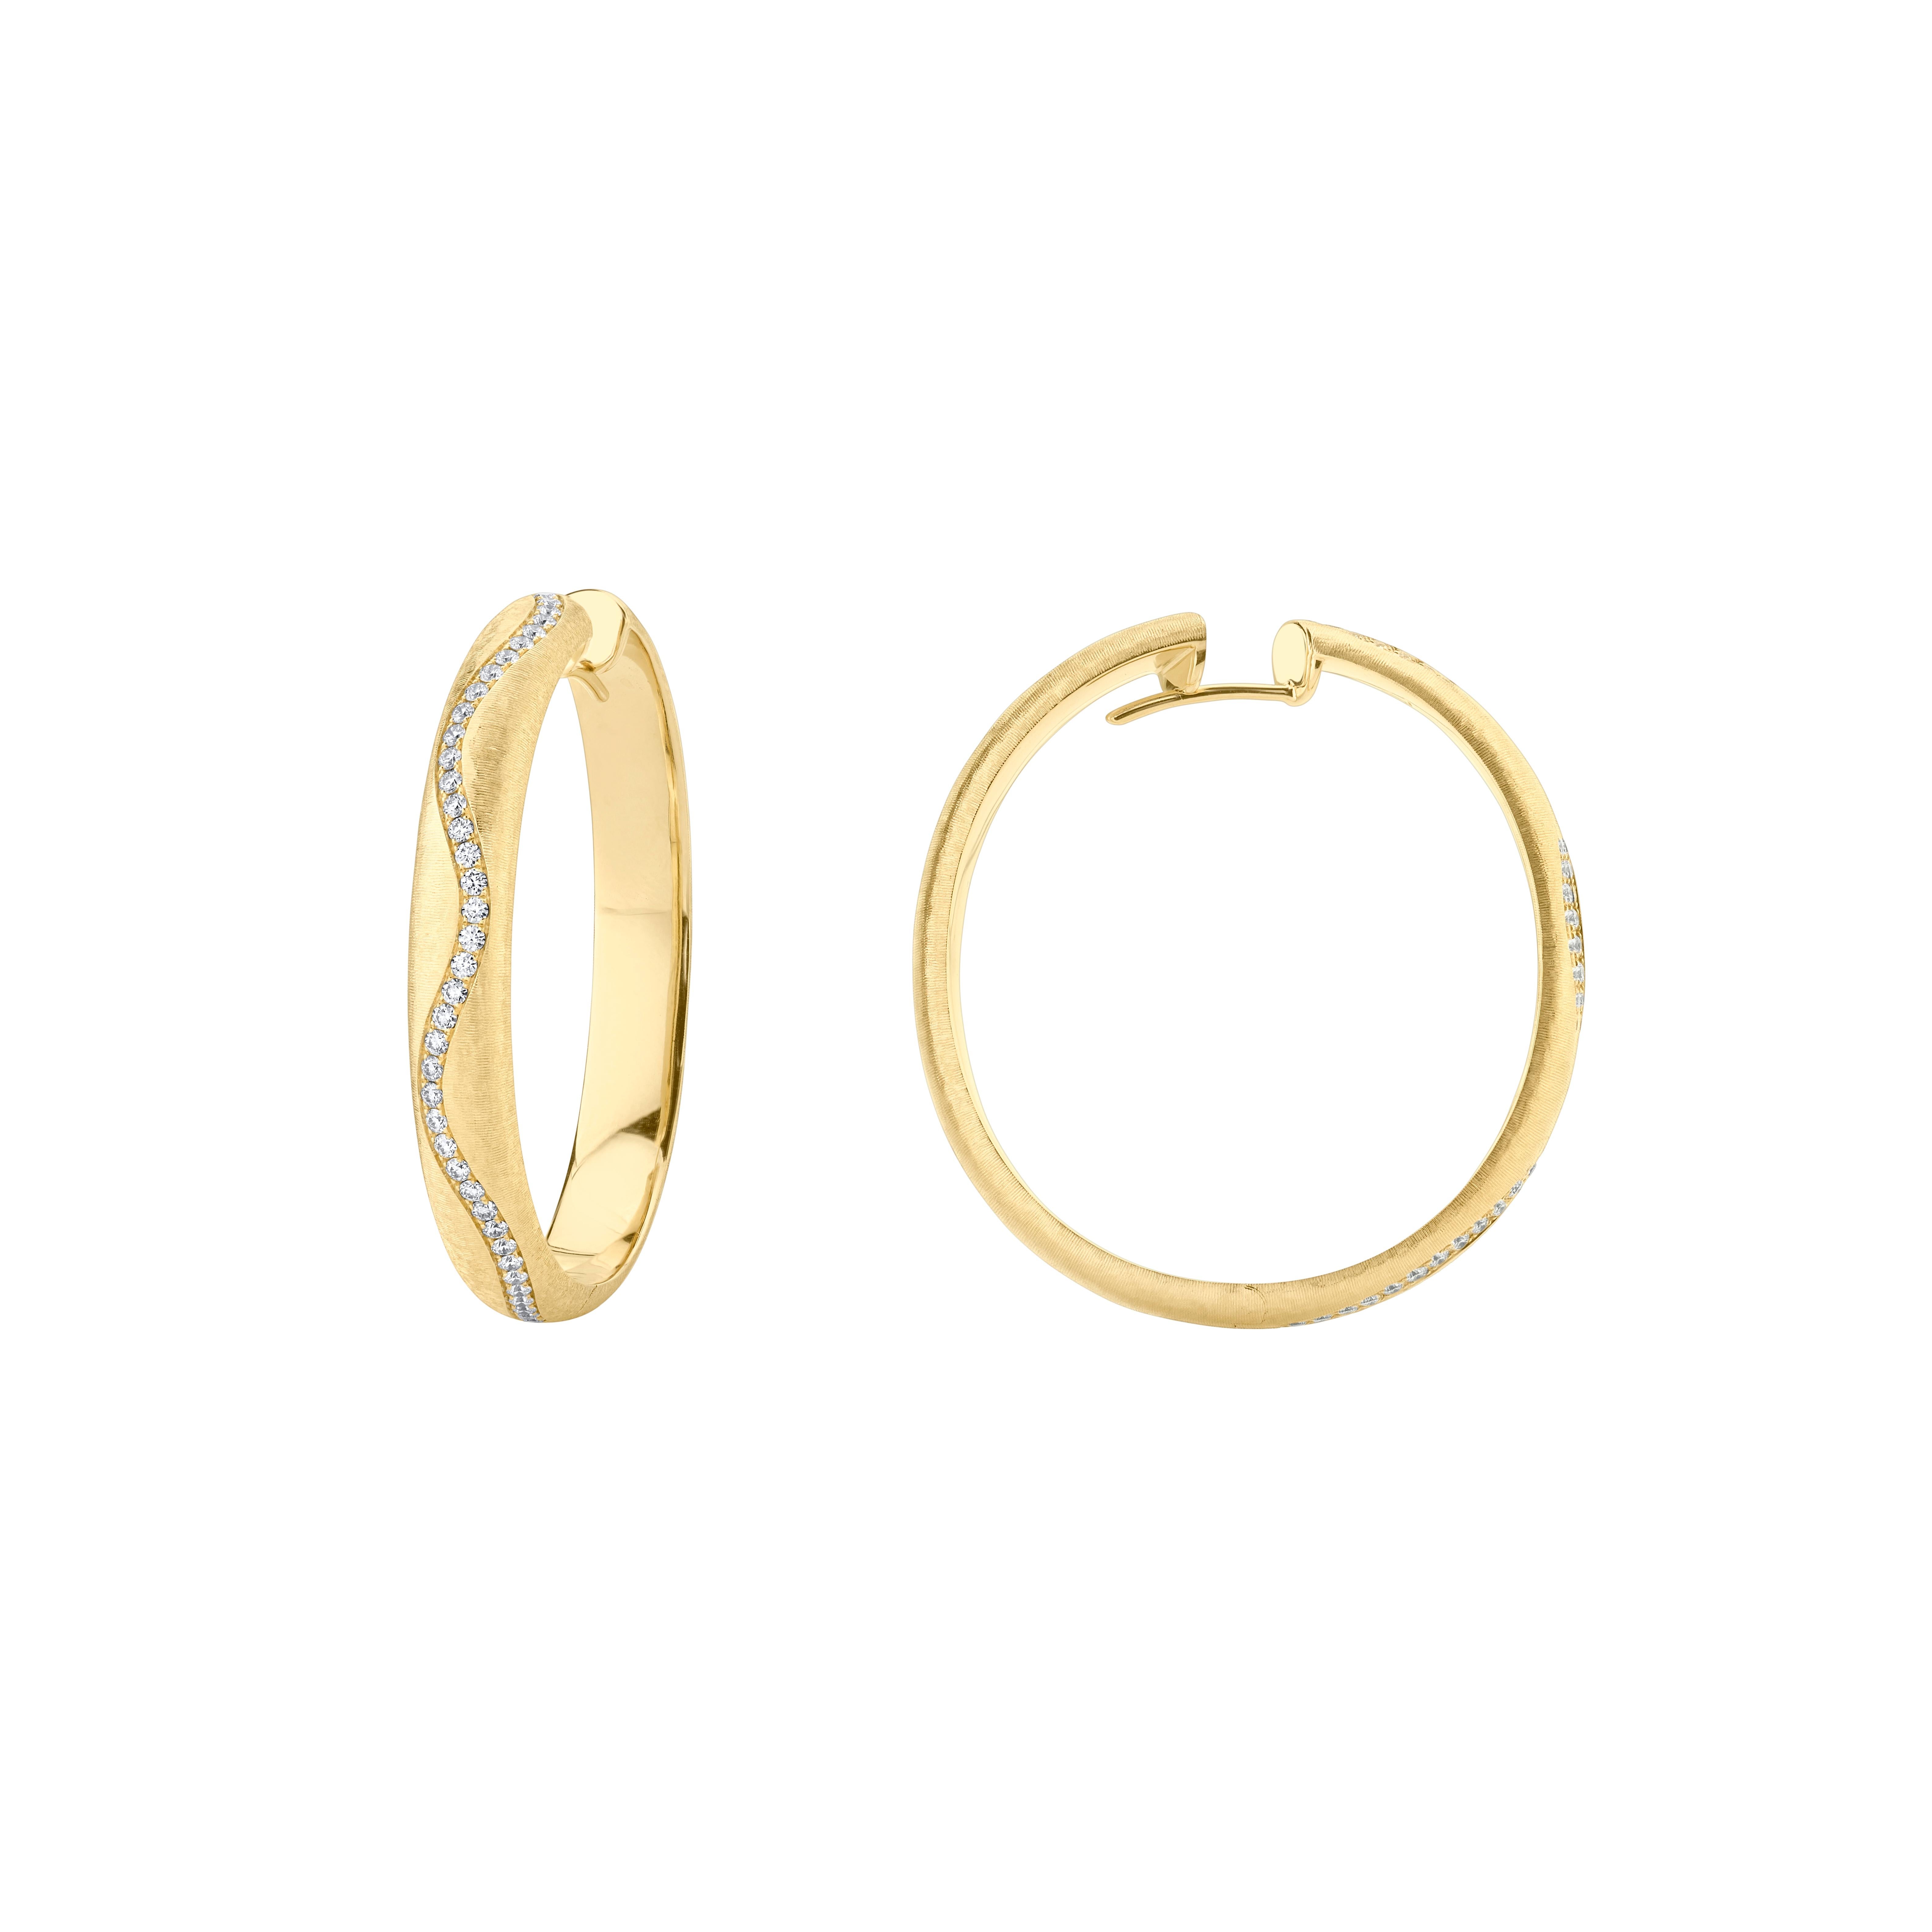 Style #: XHW35E.
SYLVIA KONTENTE  18K Yellow gold diamond hoop earrings with hand-engraved finish.
Precision-cut, round brilliant diamonds.
Diamond total weight: 0.73ct tw.
Diamond color/clarity: DEF/VVS VS.
Hand-engraved finish - The ancient art of